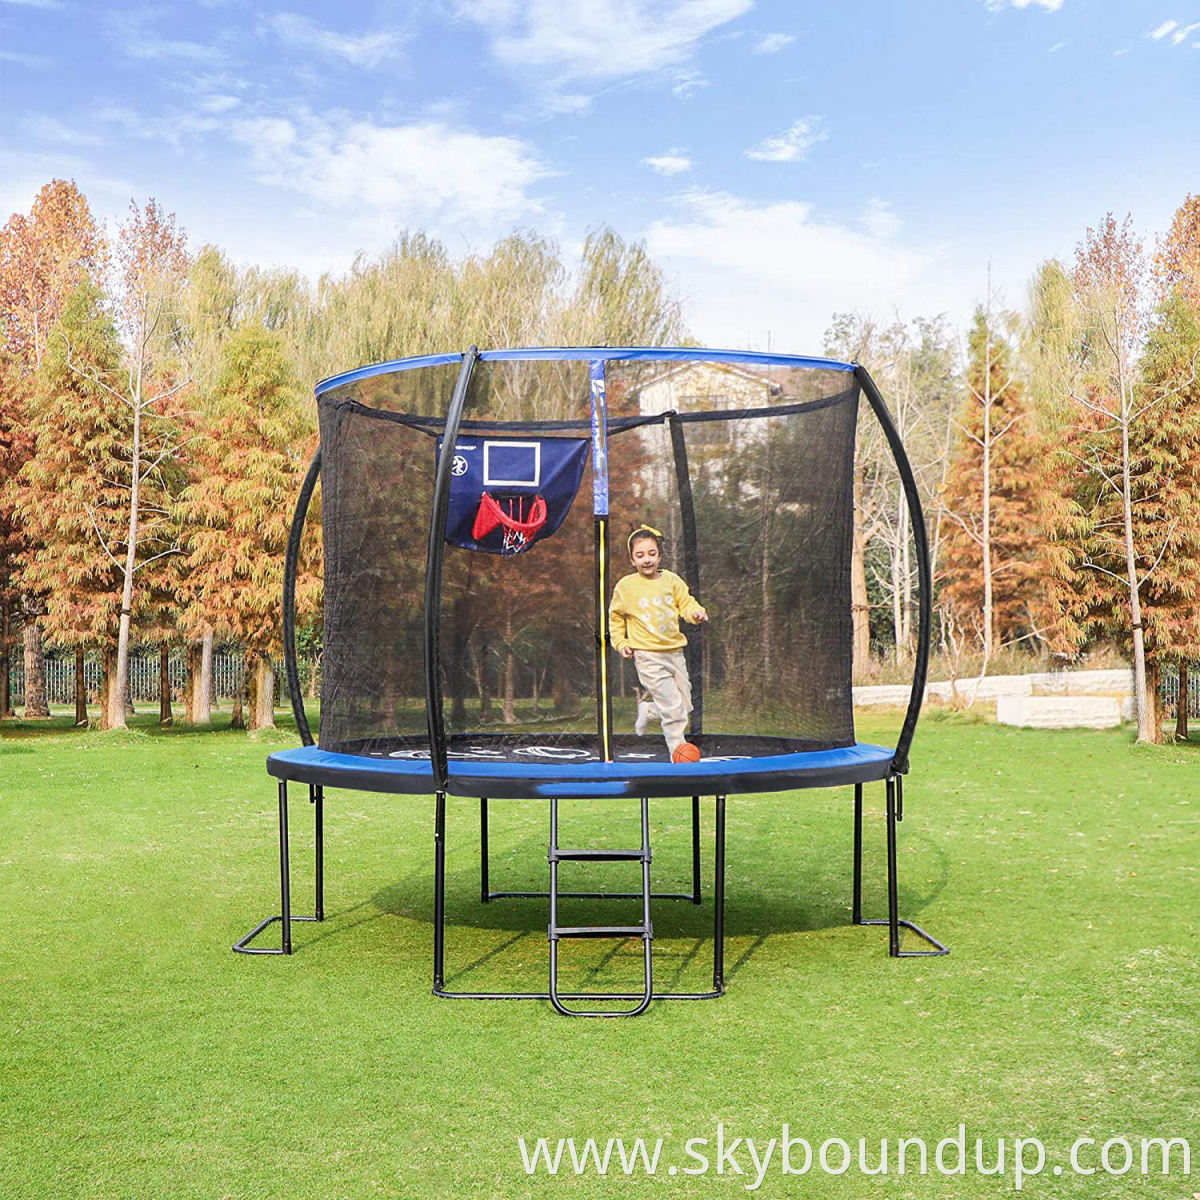 Garden anti-fall trampoline with safety fence children's trampoline safety exercise